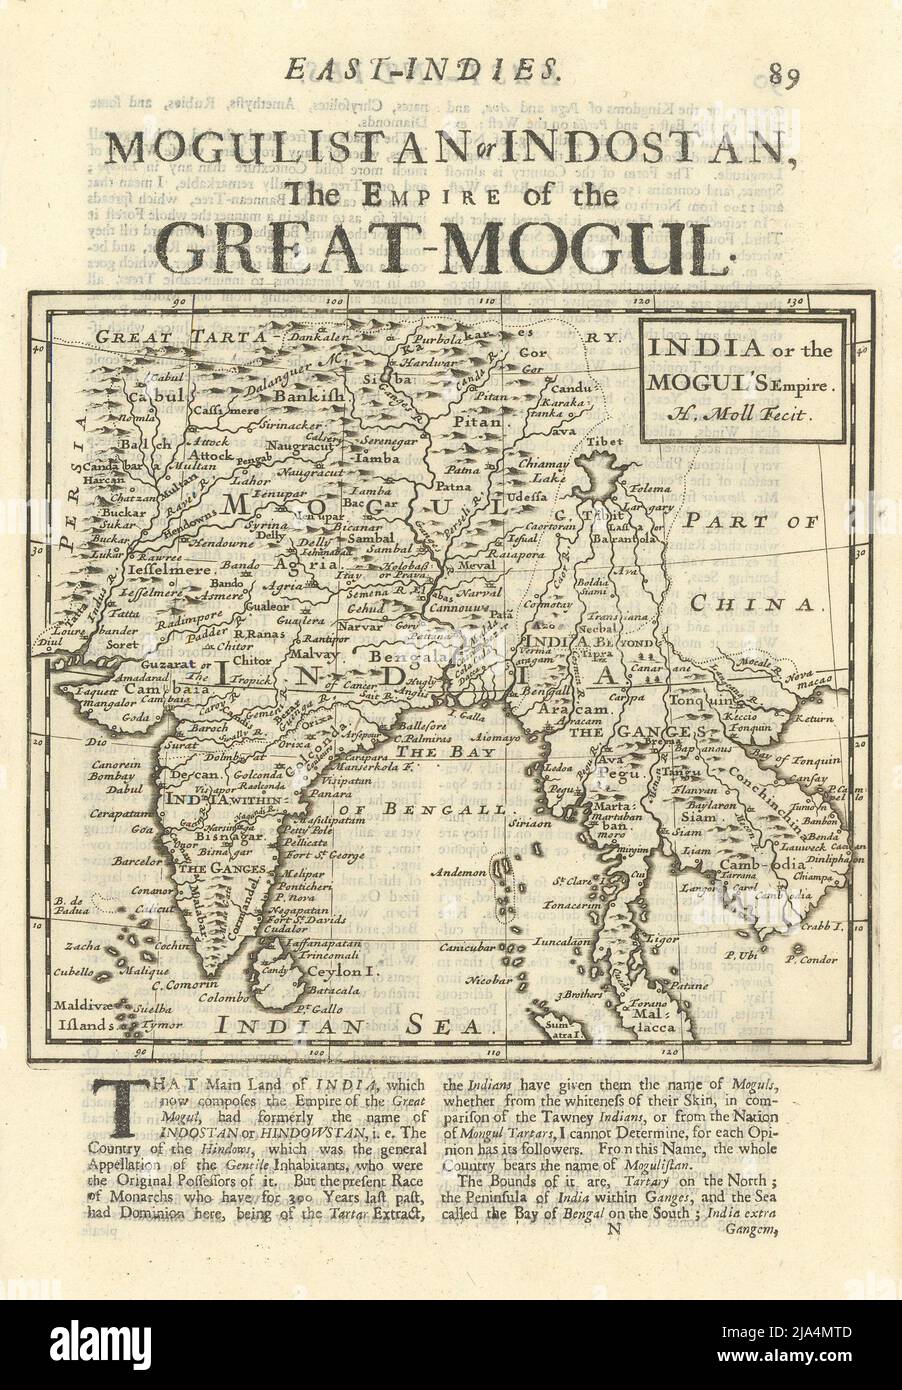 India or the Mogul's Empire. South Asia Indochina Mughal Empire. MOLL 1709 map Stock Photo